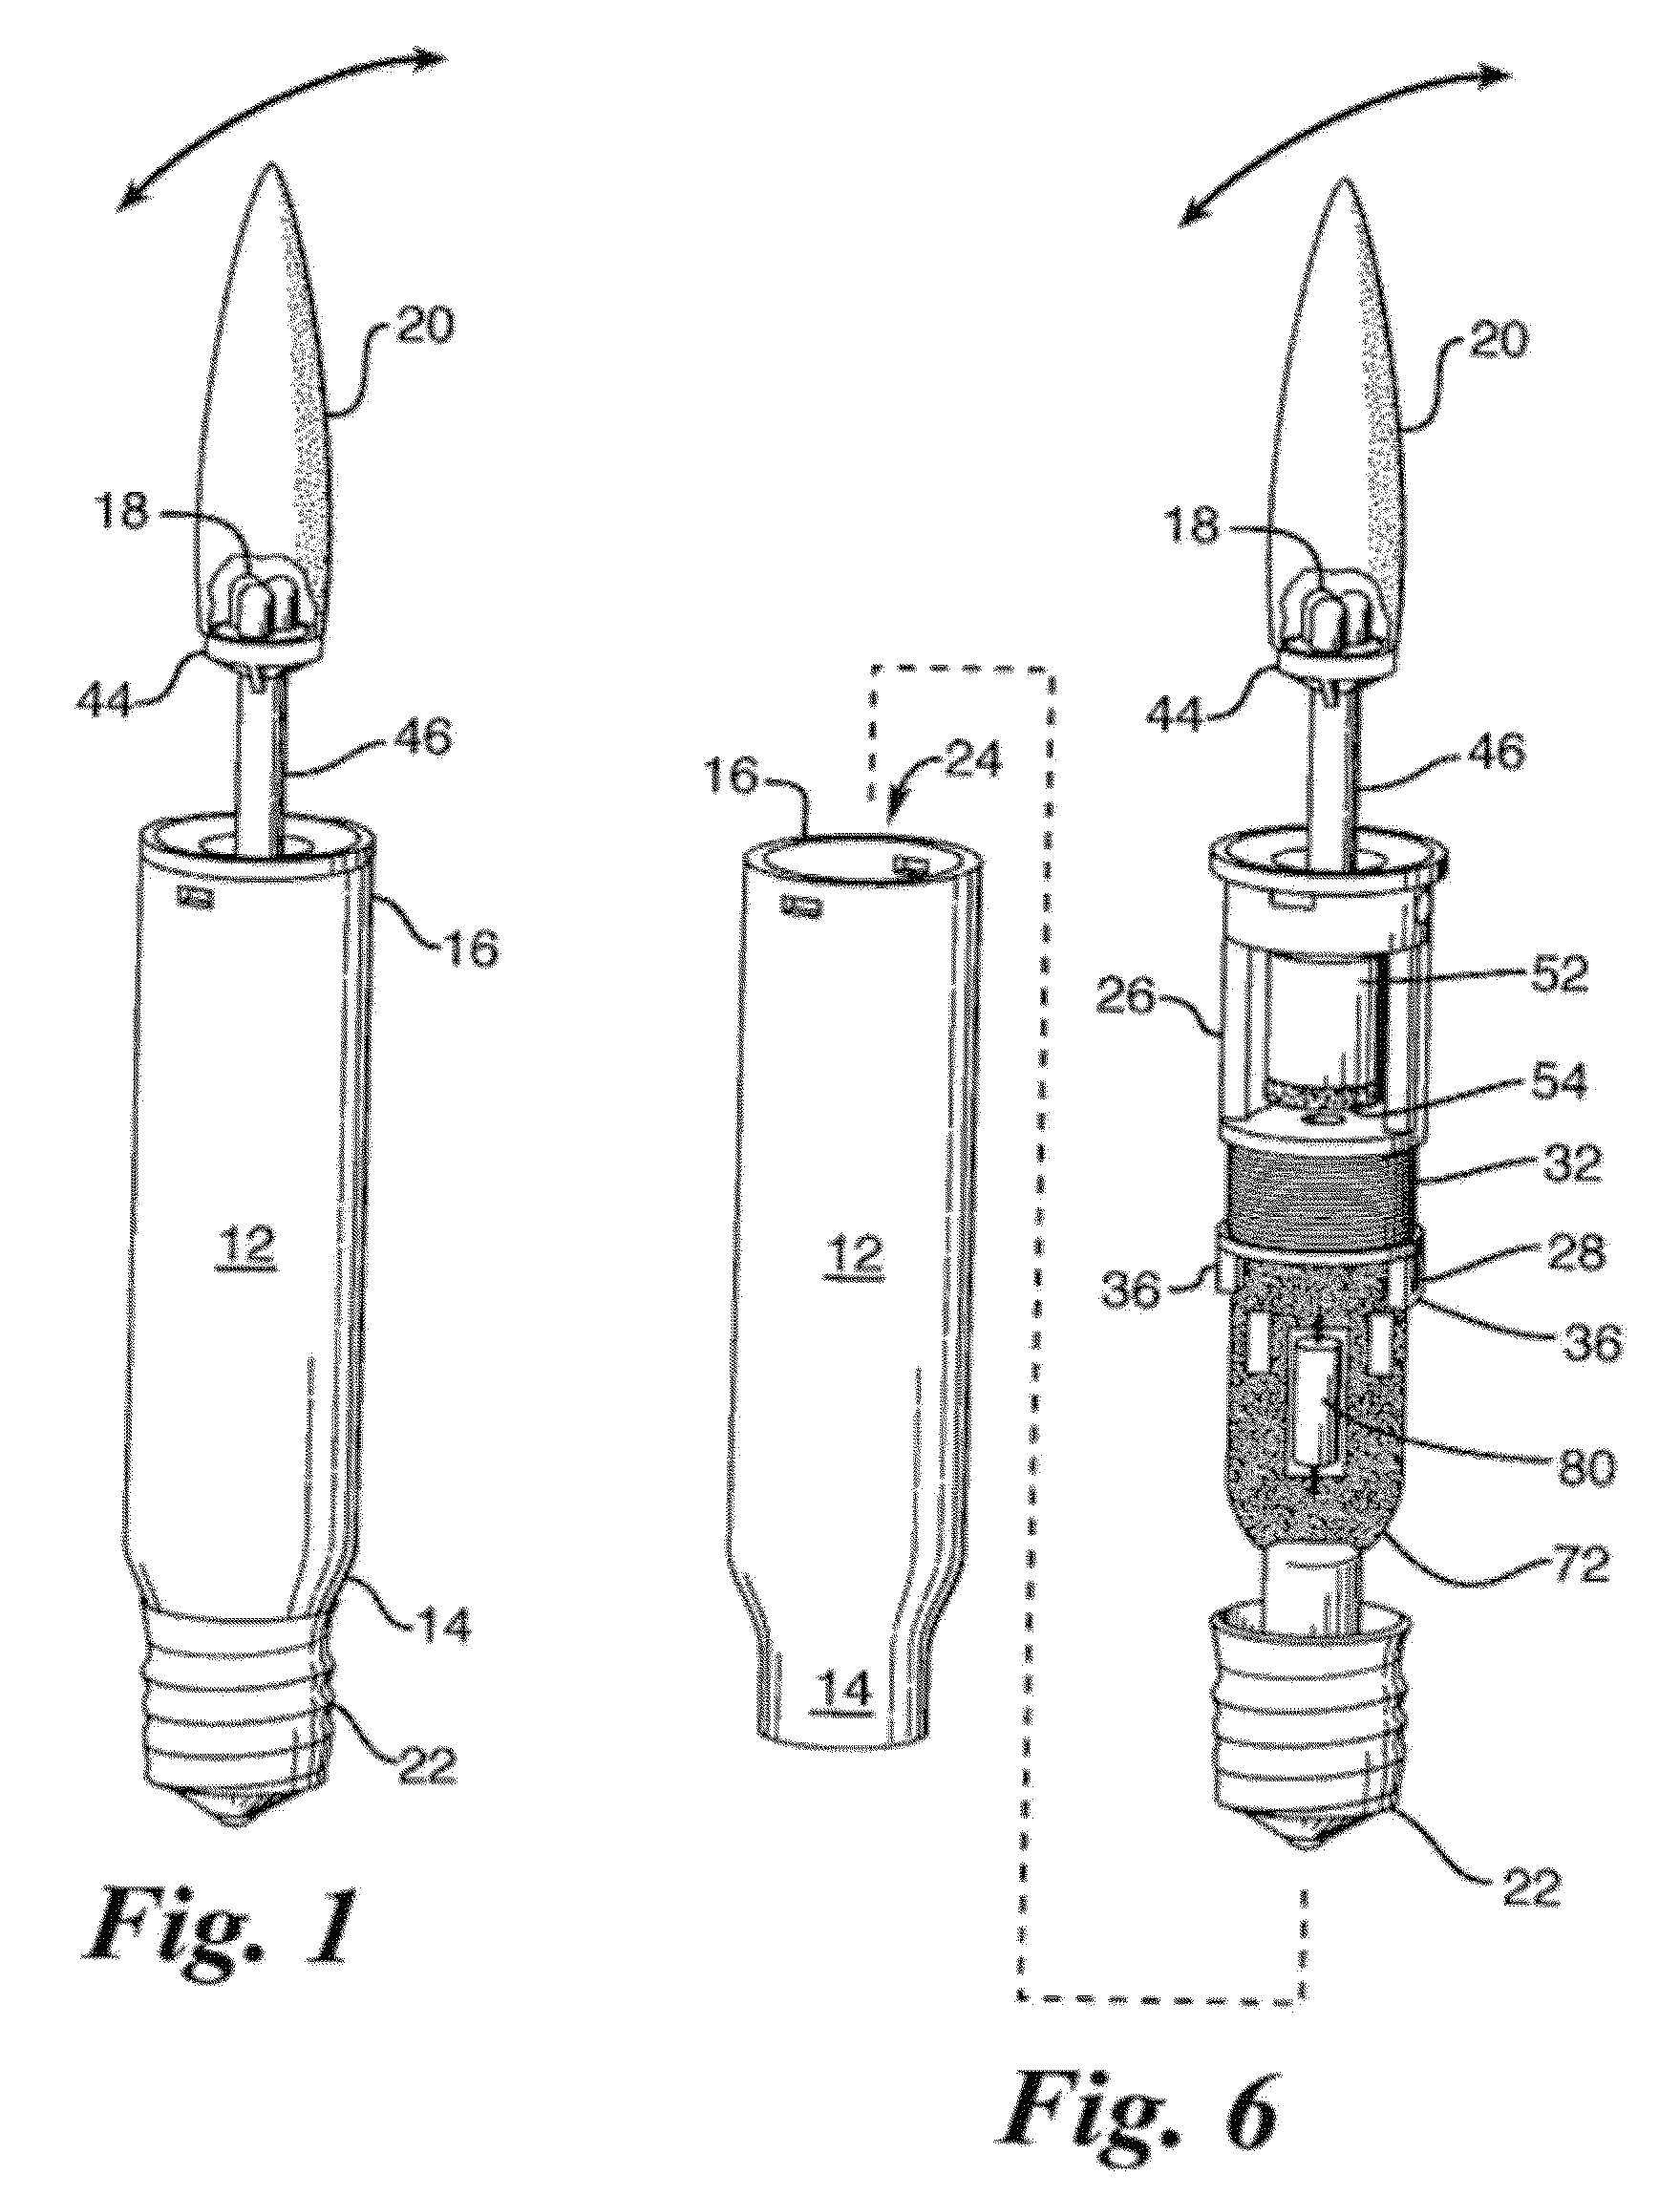 Systems, components, and methods for electronic candles with moving flames